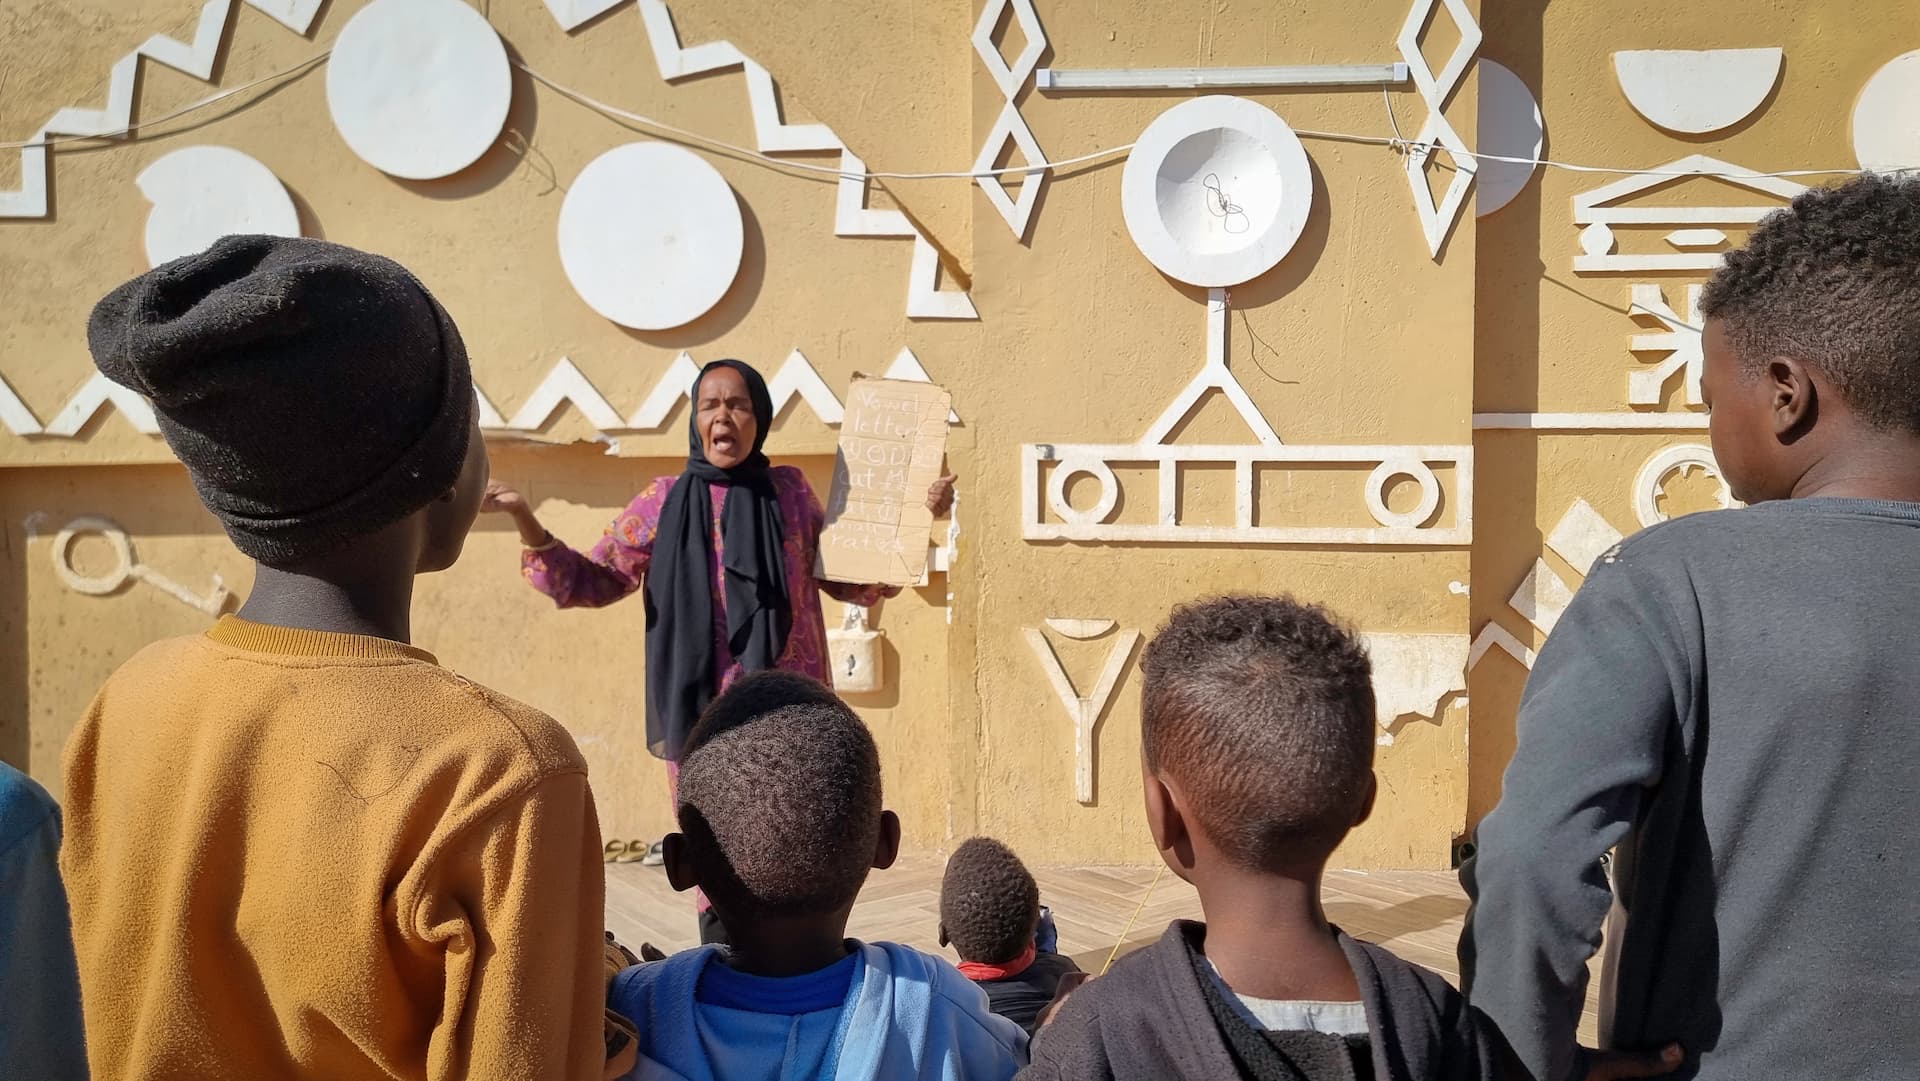 A displaced teacher gives an English class to children in a shelter for displaced families in Wadi Halfa, near Sudan’s border with Egypt.